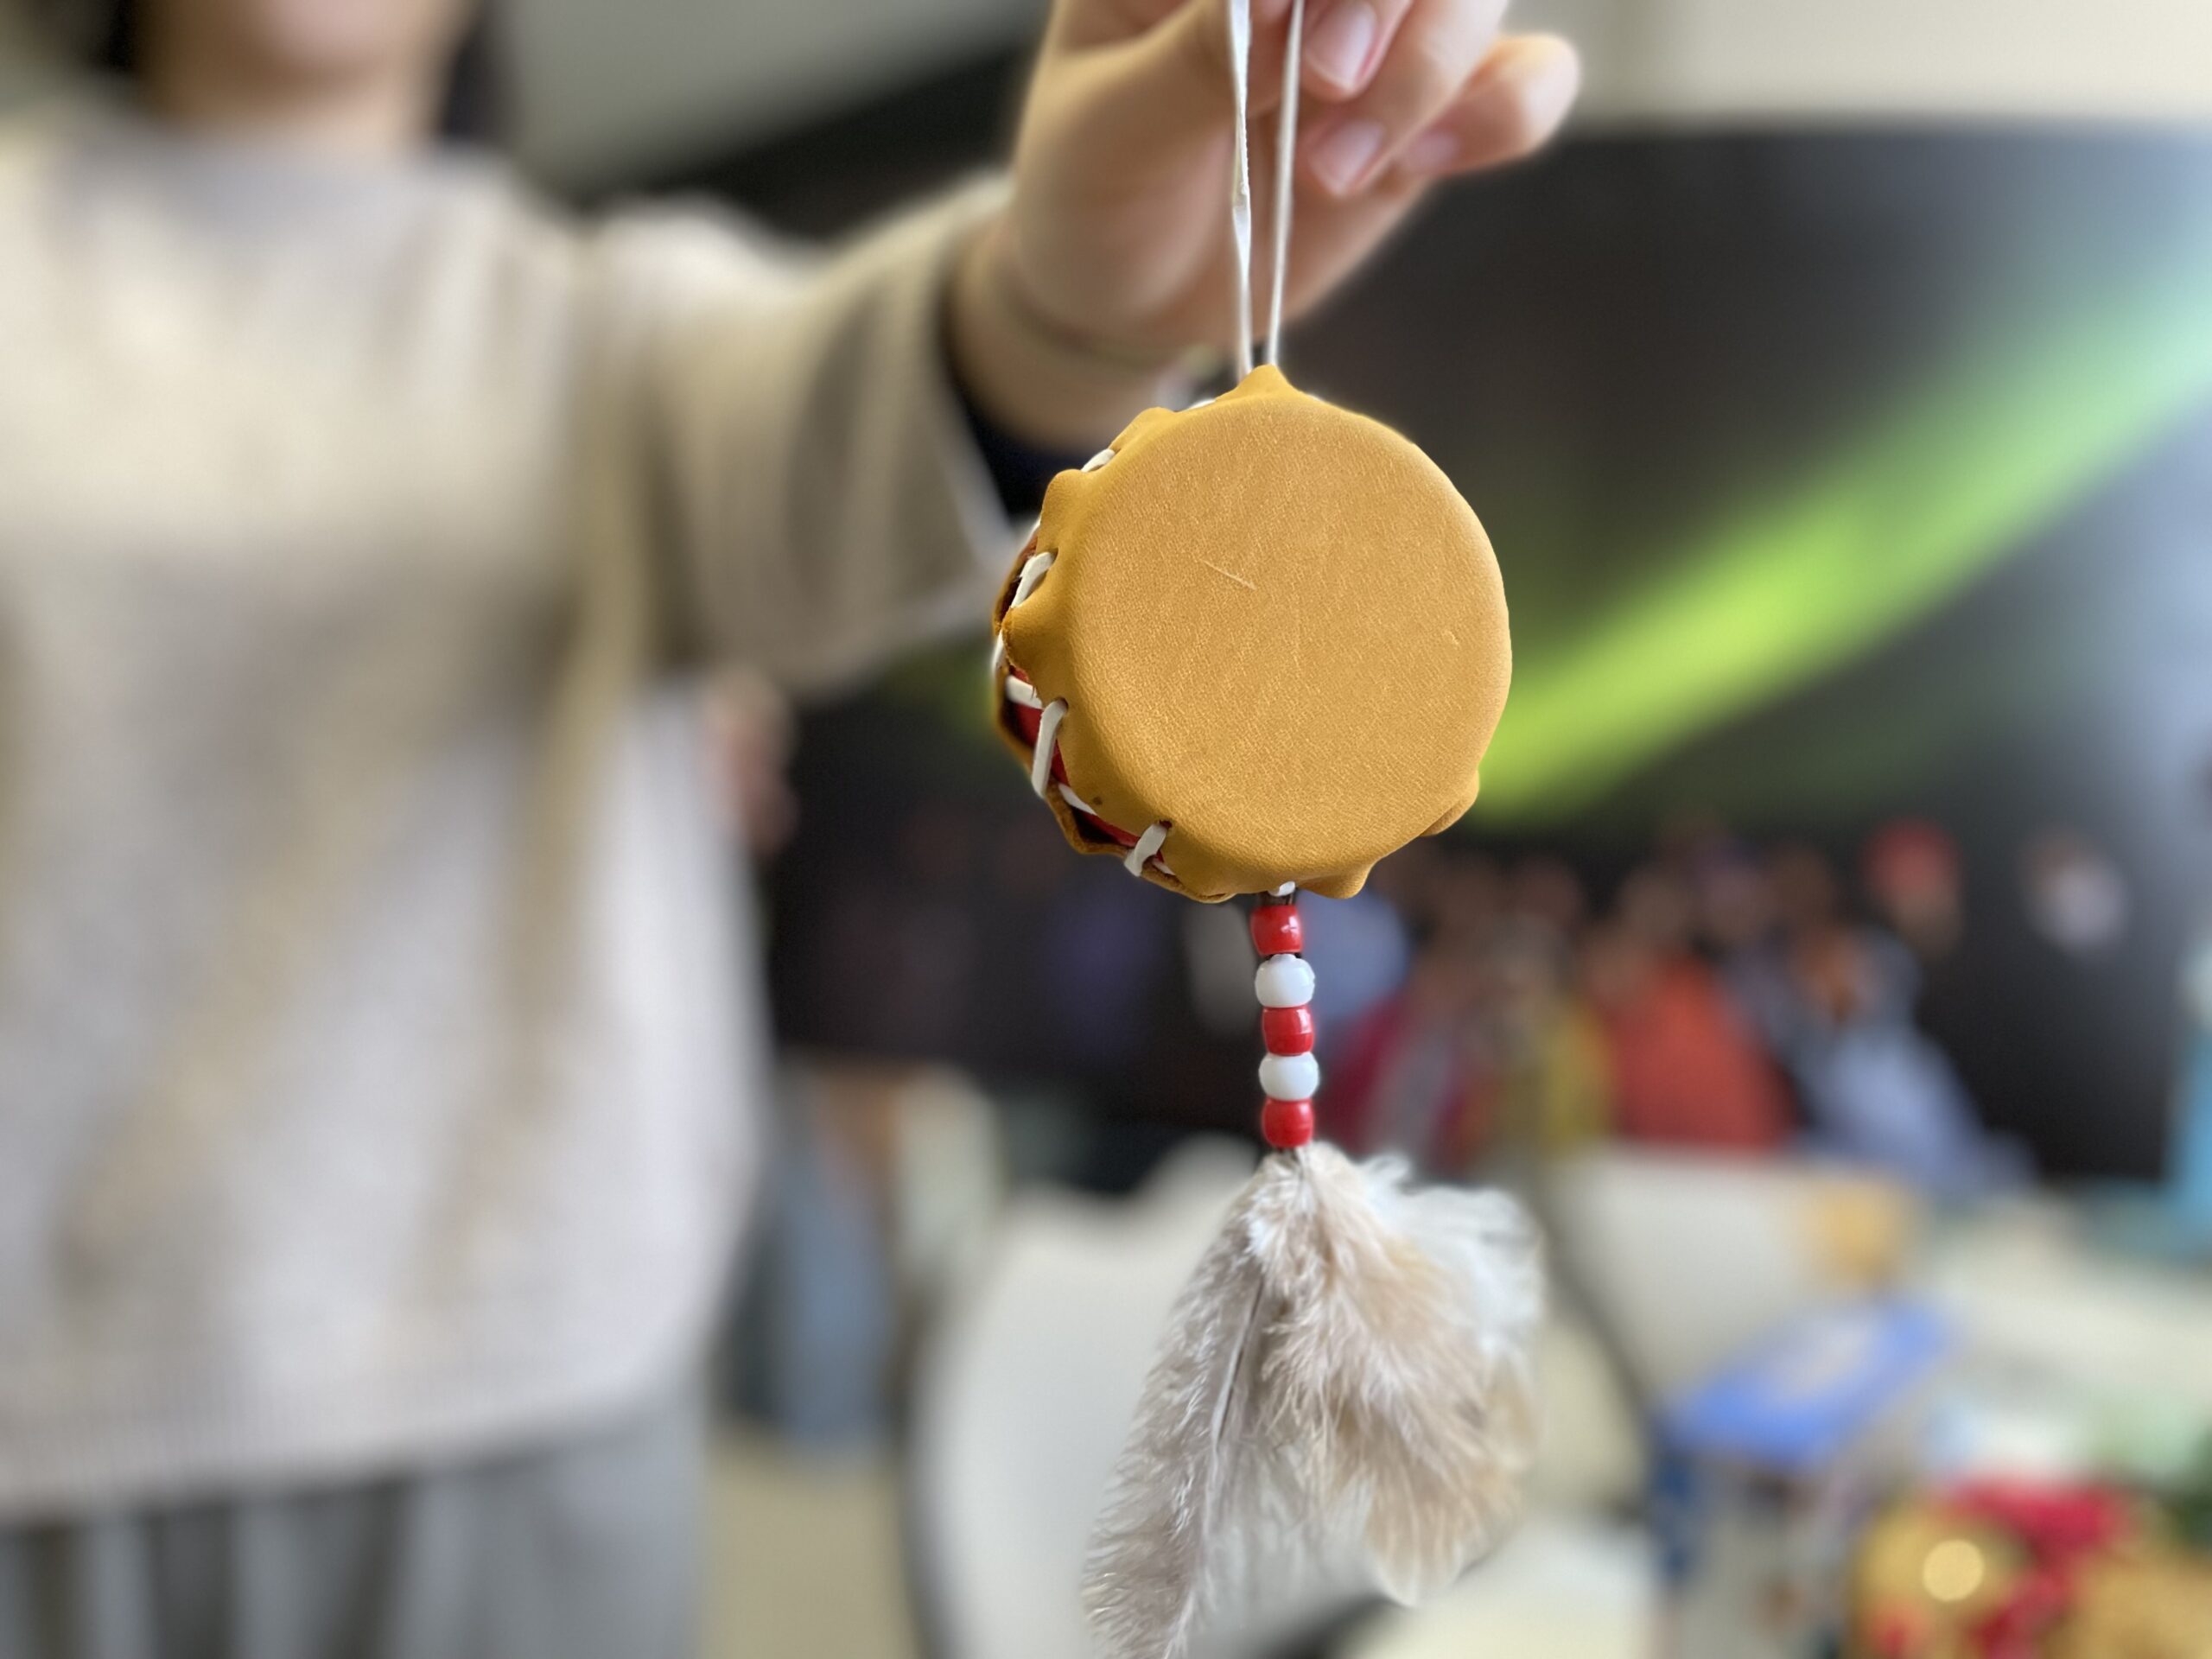 Learn about and make your own Indigenous crafts with North Star Adventures in Yellowknife